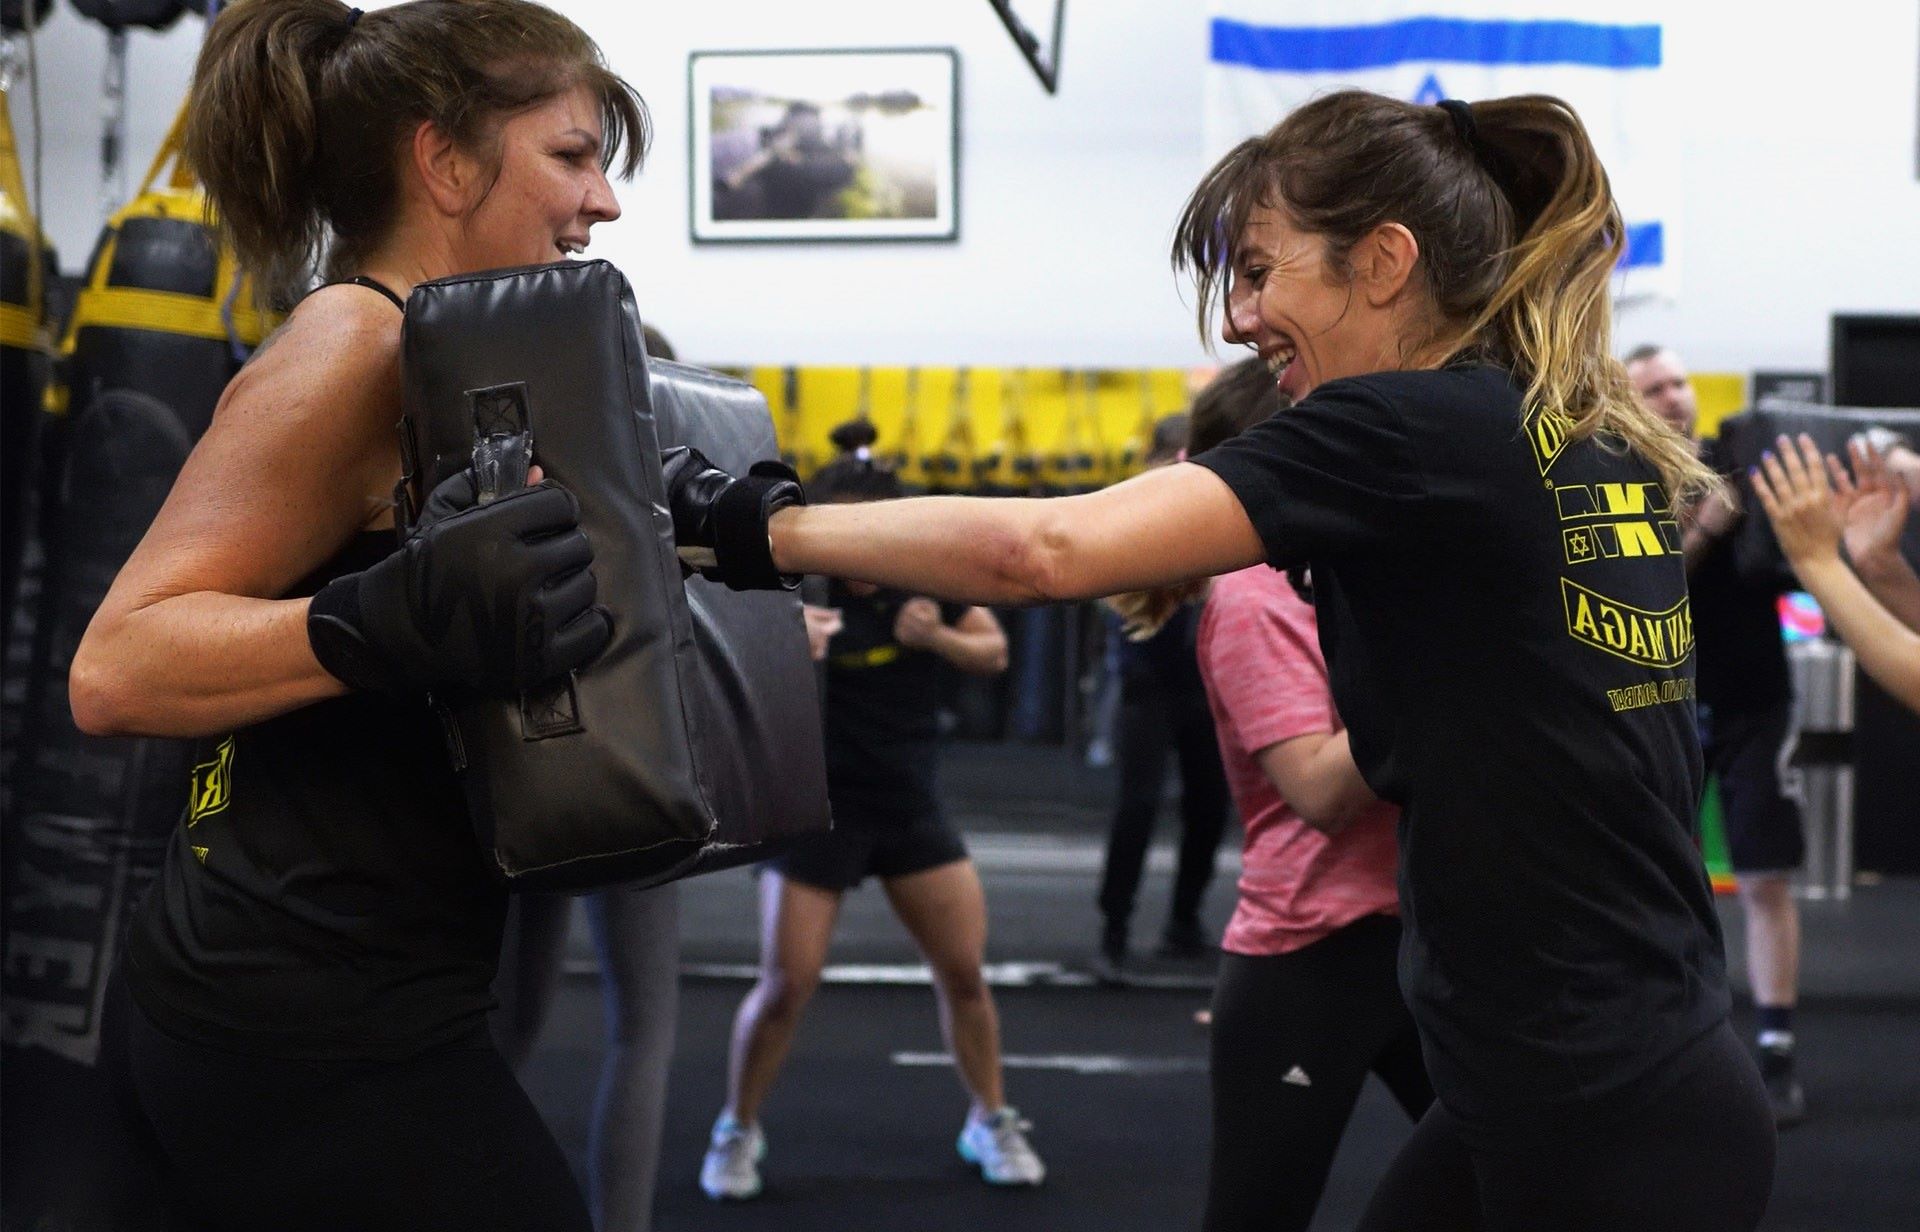 Experience An Incredible Cardio Blast With This 24-minute Krav Maga Workout